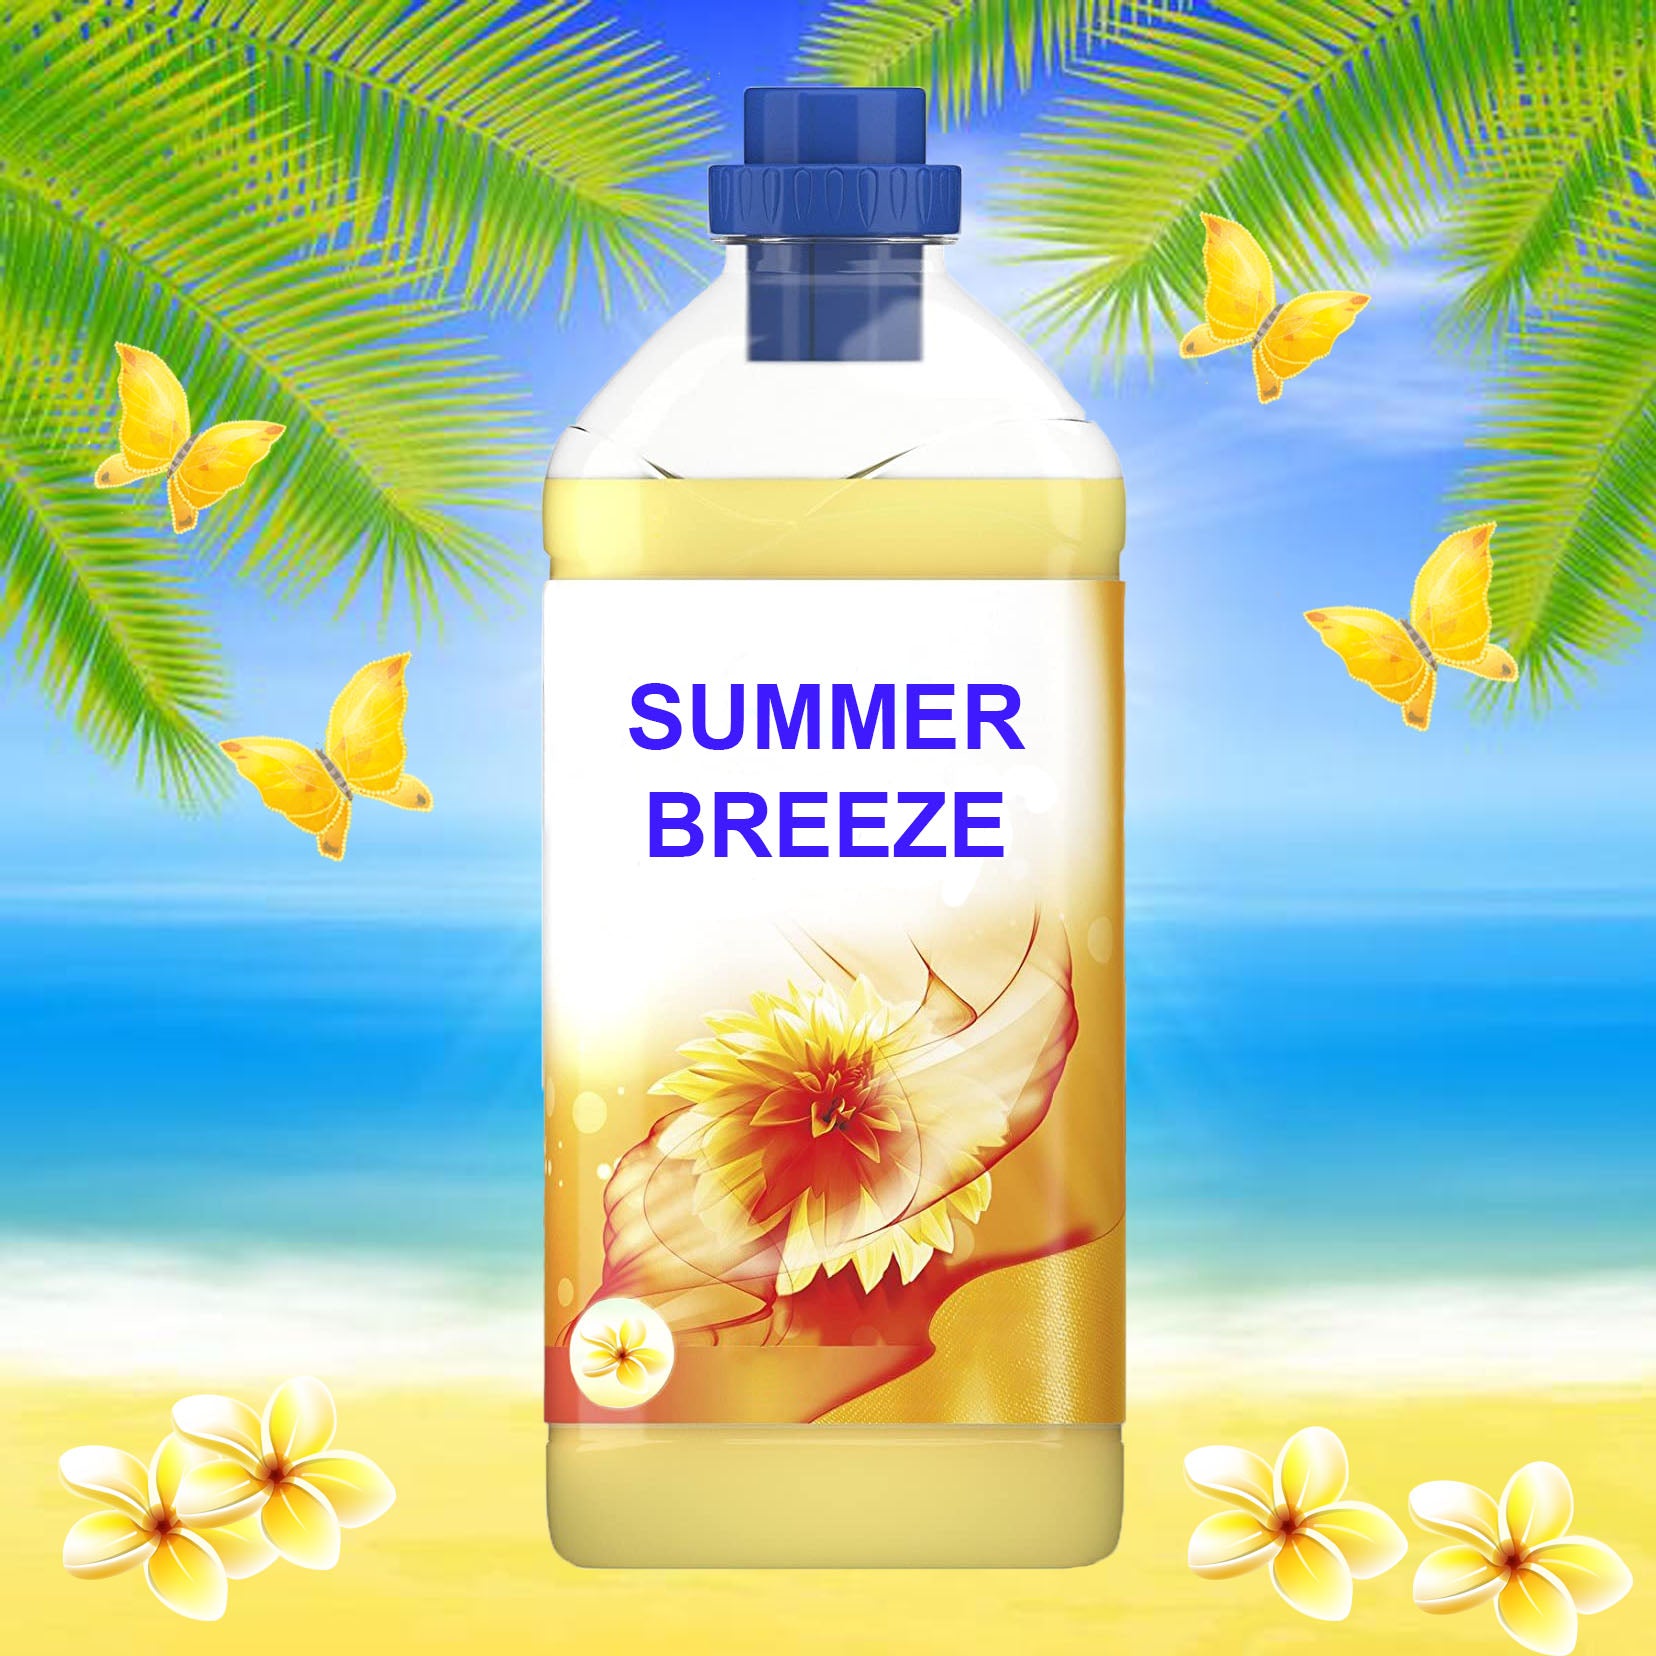 Summer Breeze Fragrance Oil | Truly Personal | Candles, Wax Melts, Soap, Bath Bombs